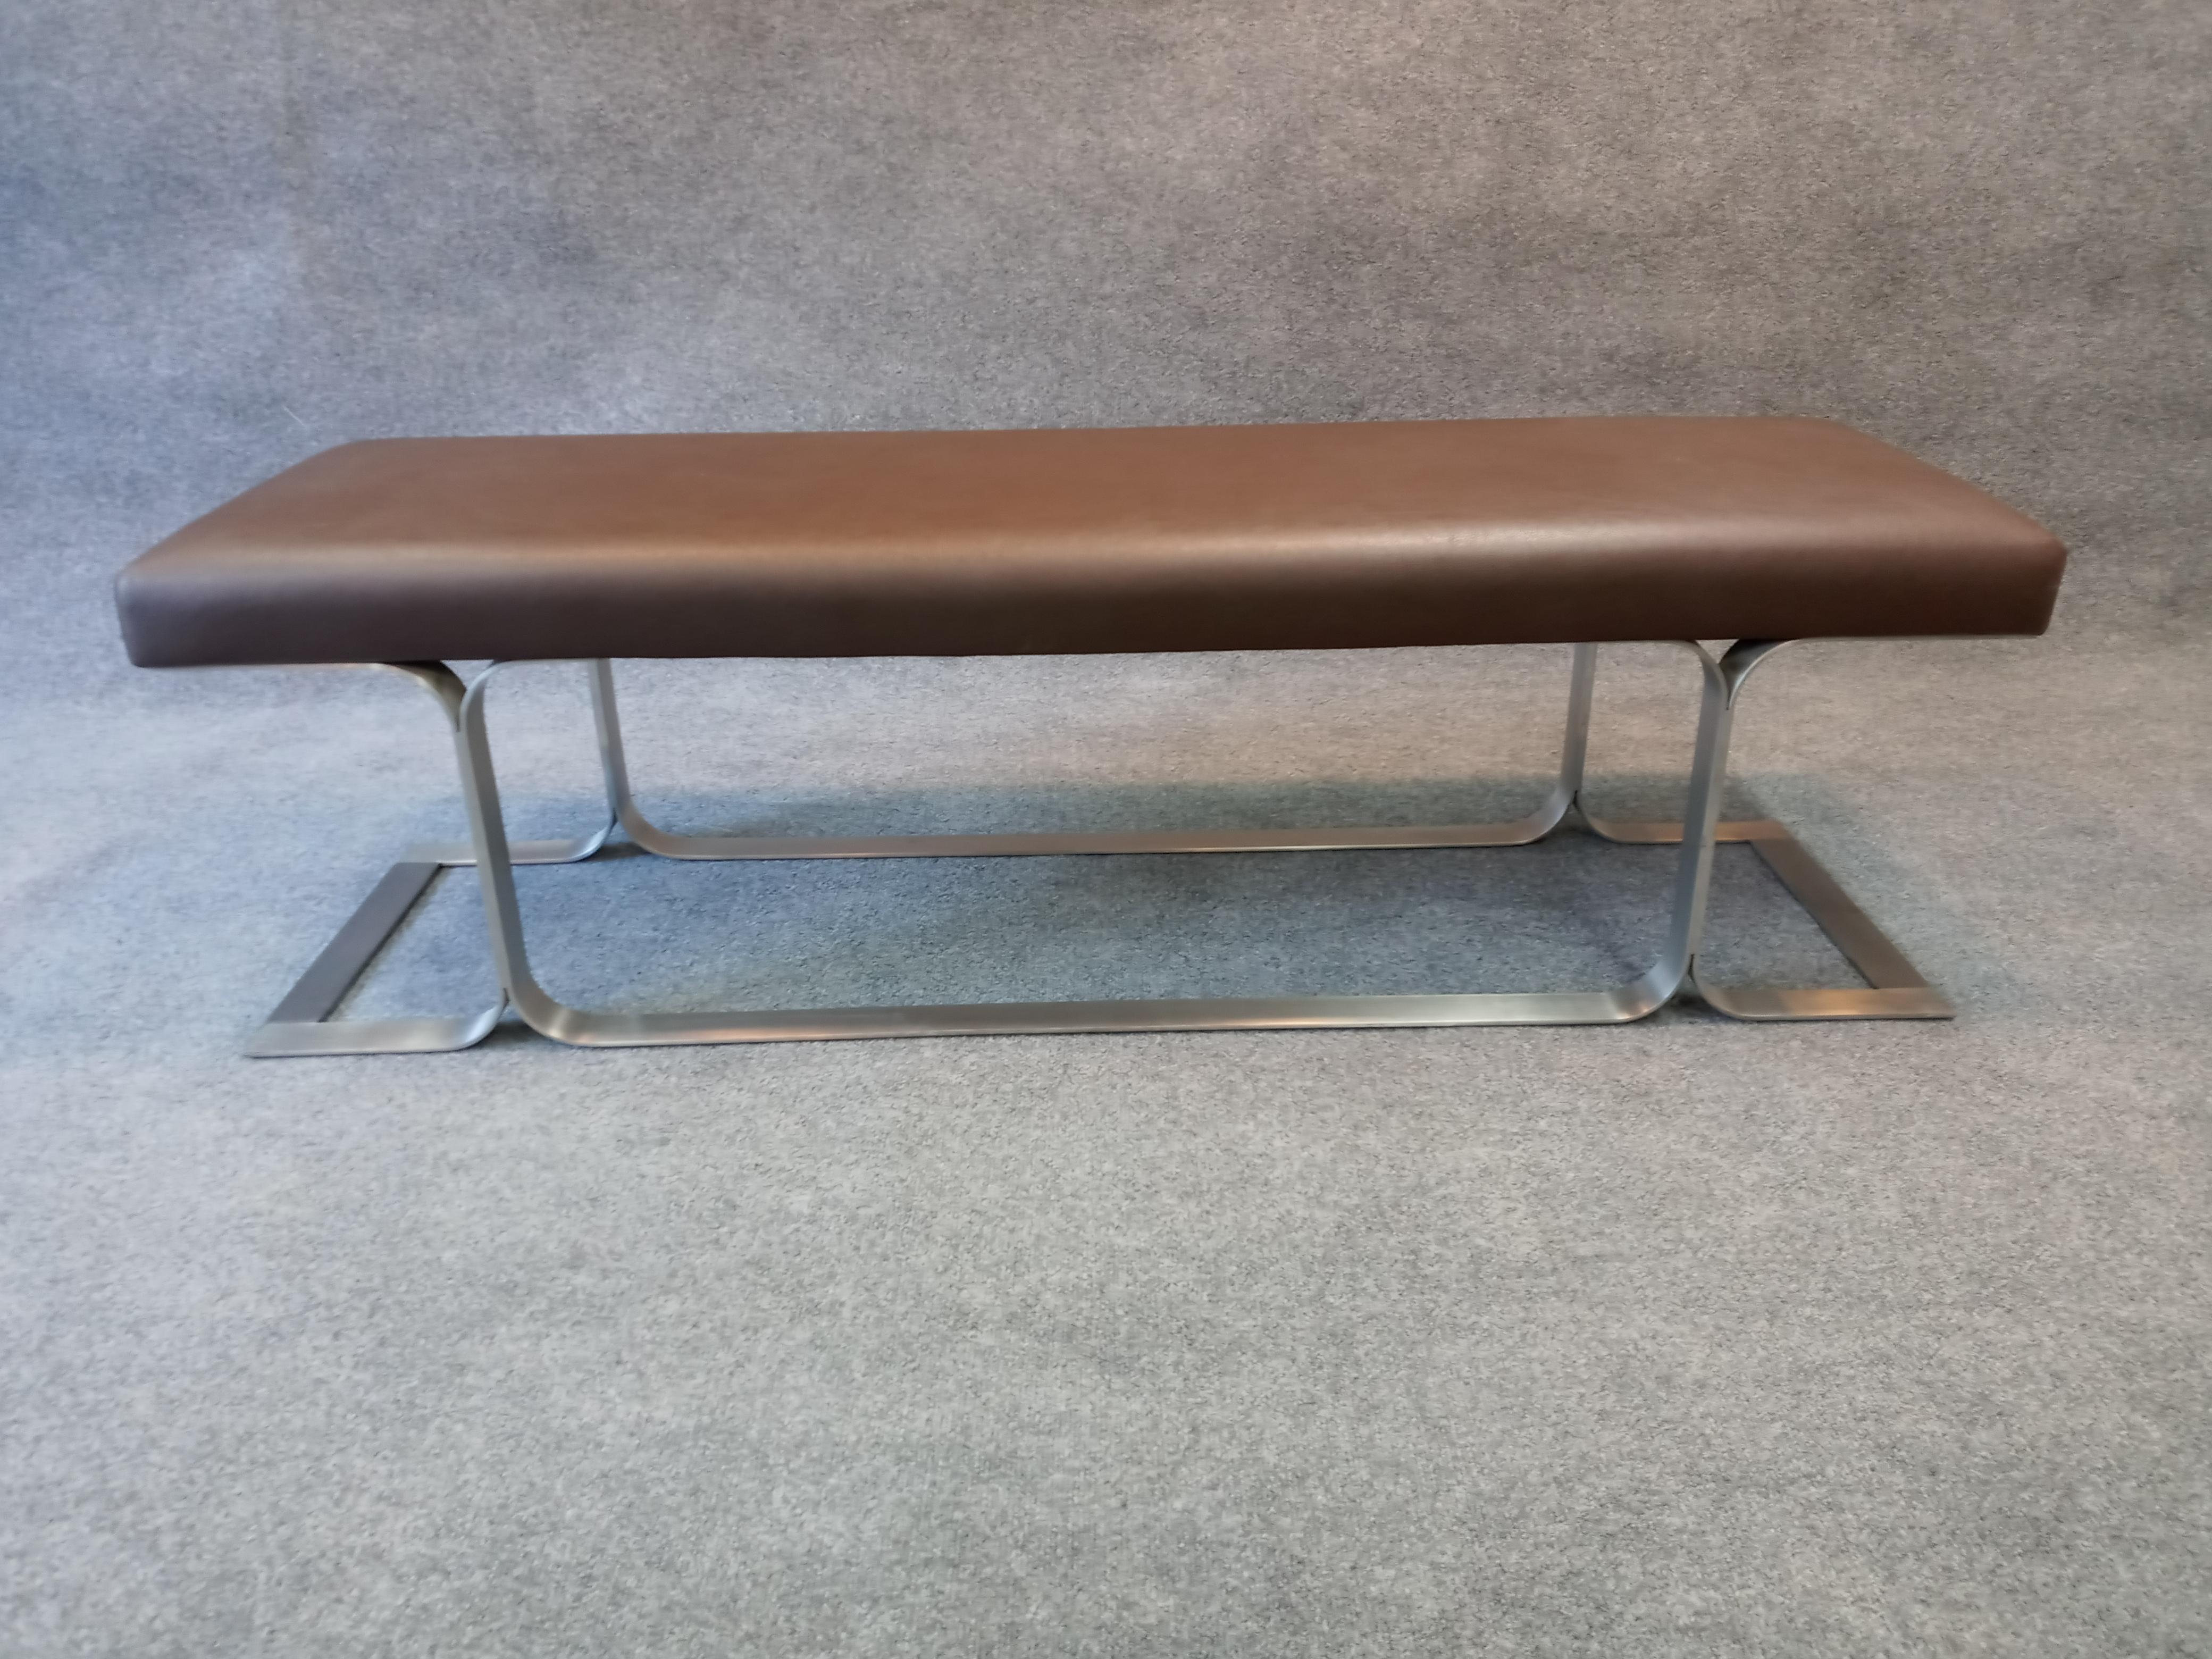 Stainless Steel Leatherette Benches in the Style of Erwin and Estelle Laverne MCM Post-Modern